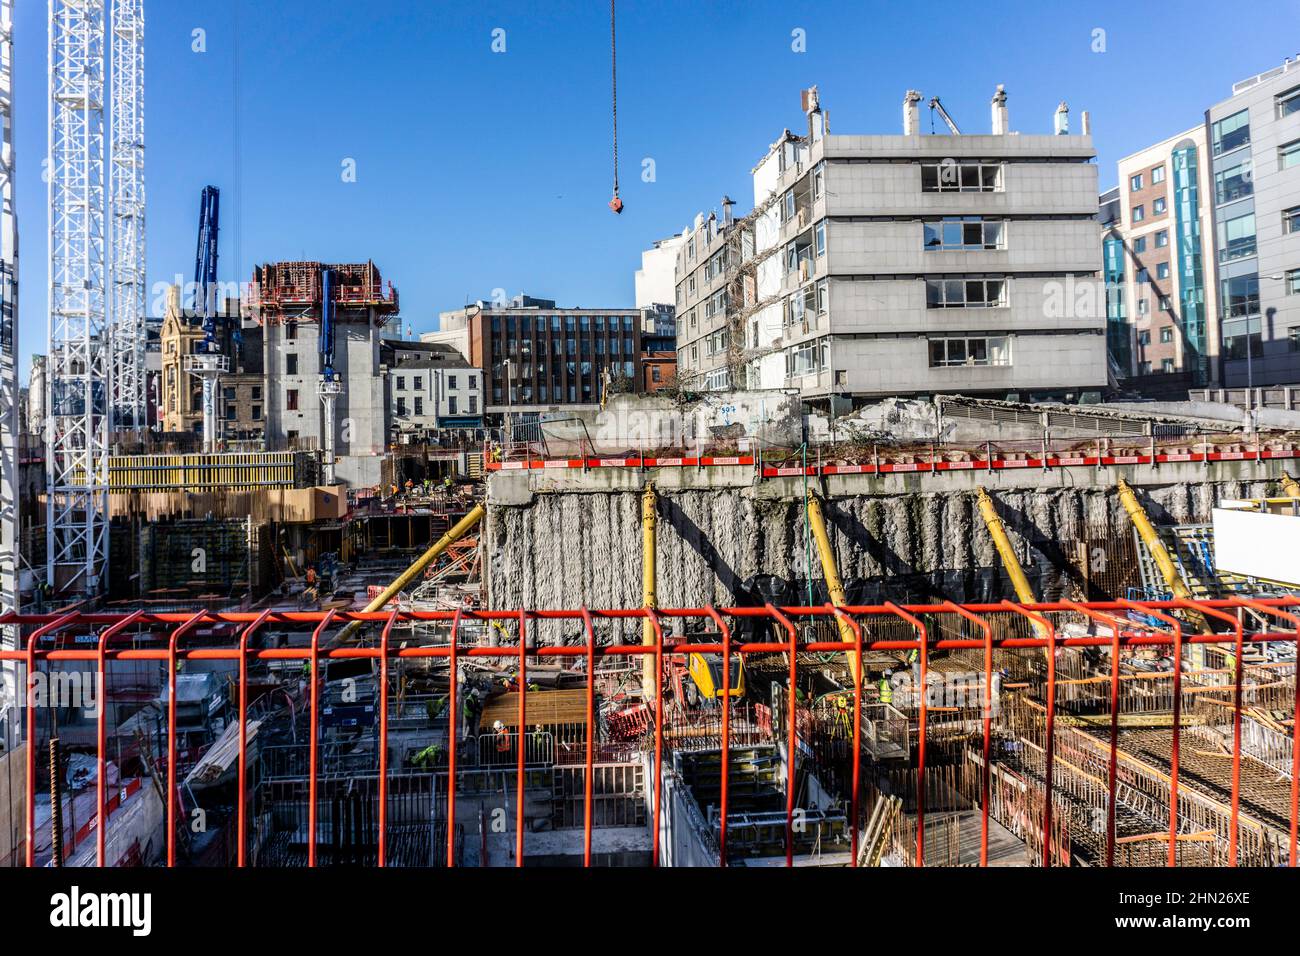 Building work on the former Apollo House Dublin, Ireland, where a 21 storey mixed development is under construction. Stock Photo